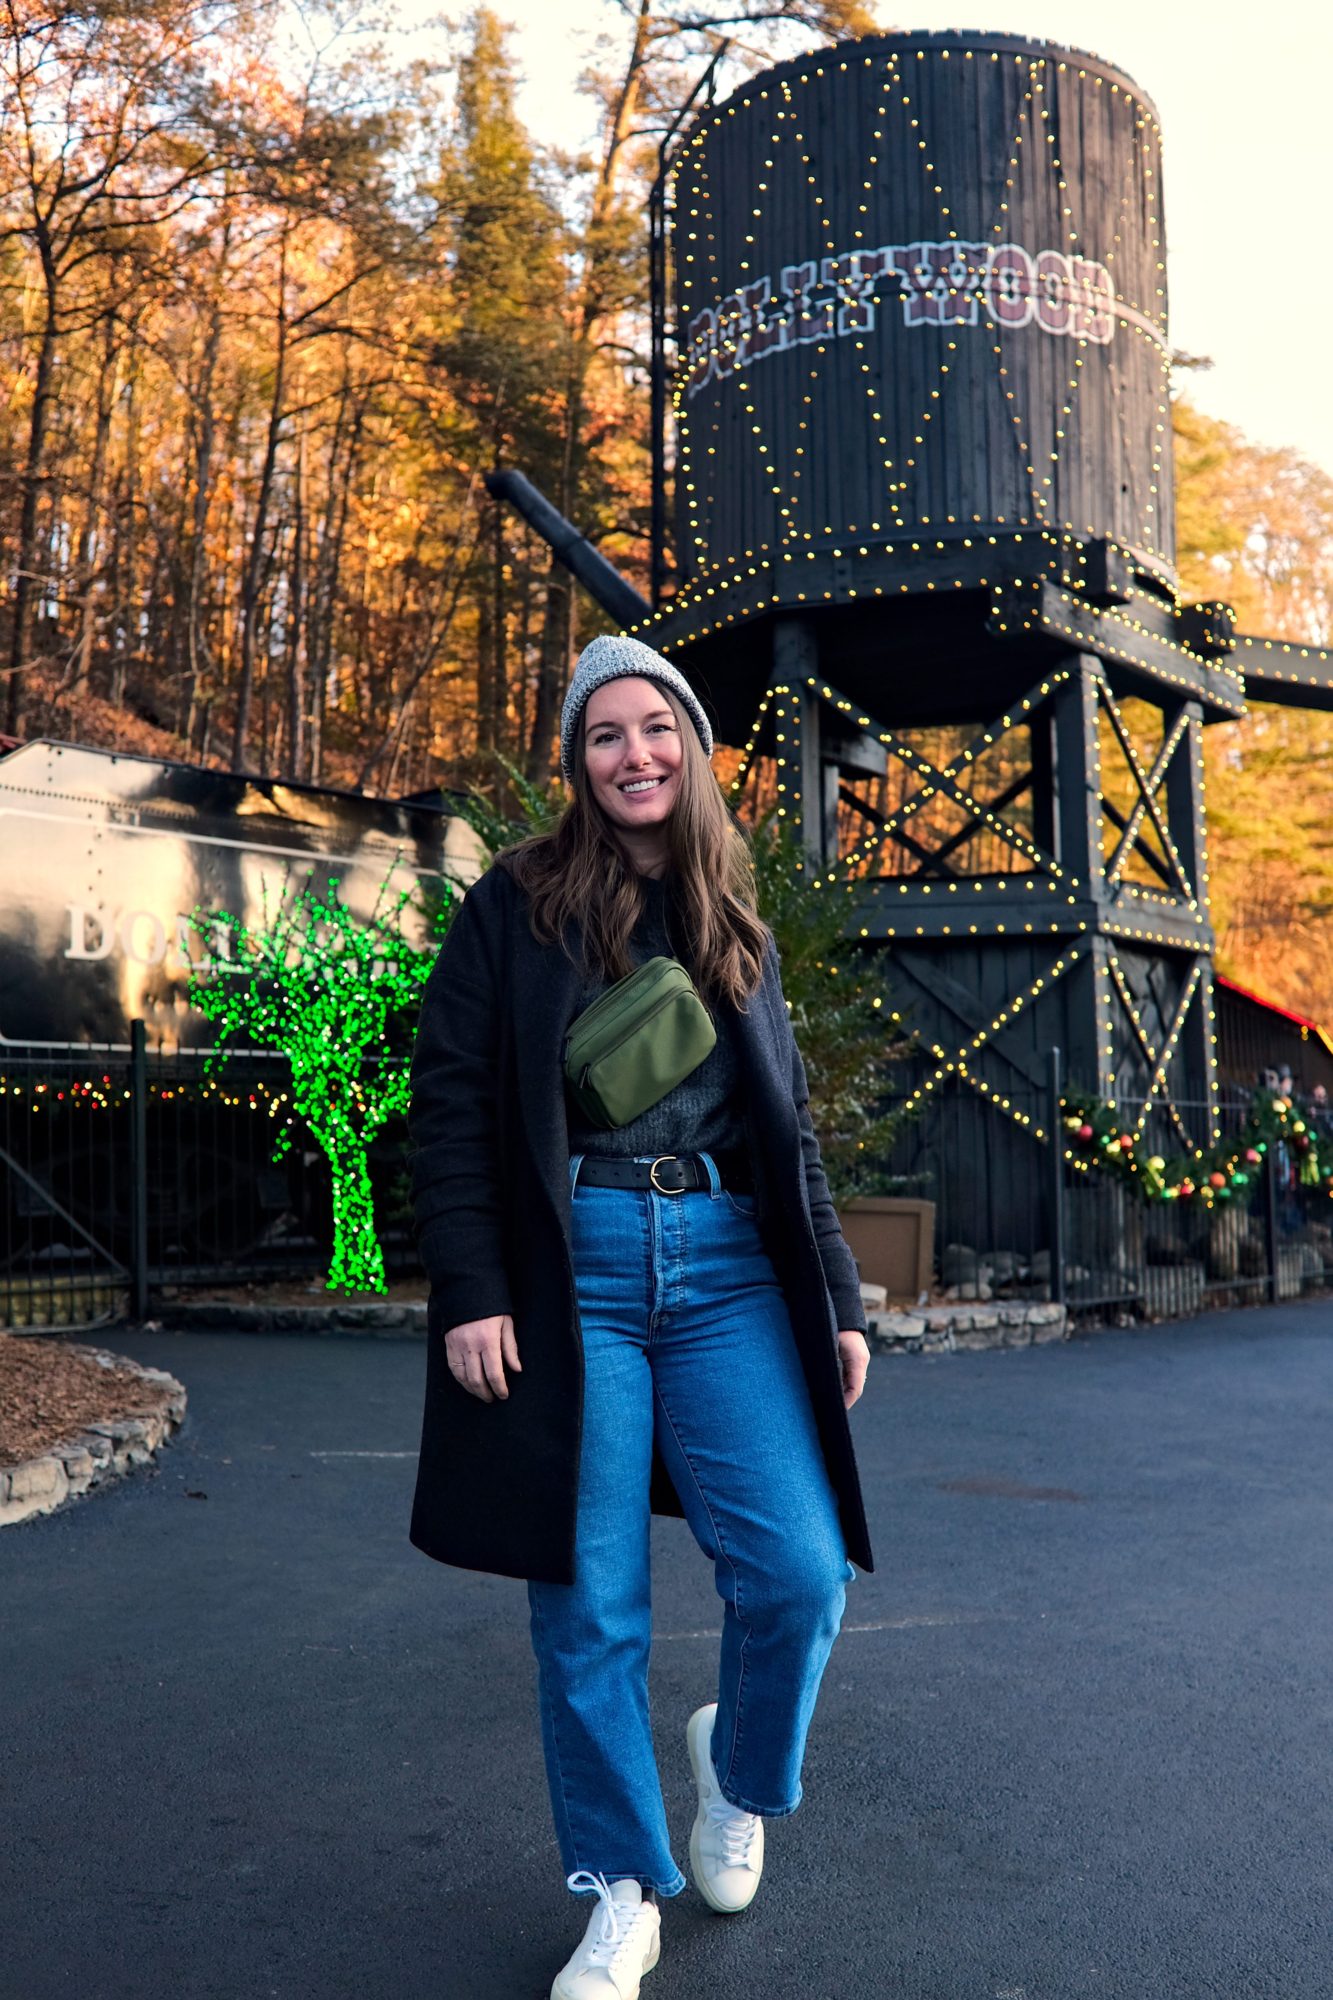 Alyssa walks in front of the train boarding area at Dollywood